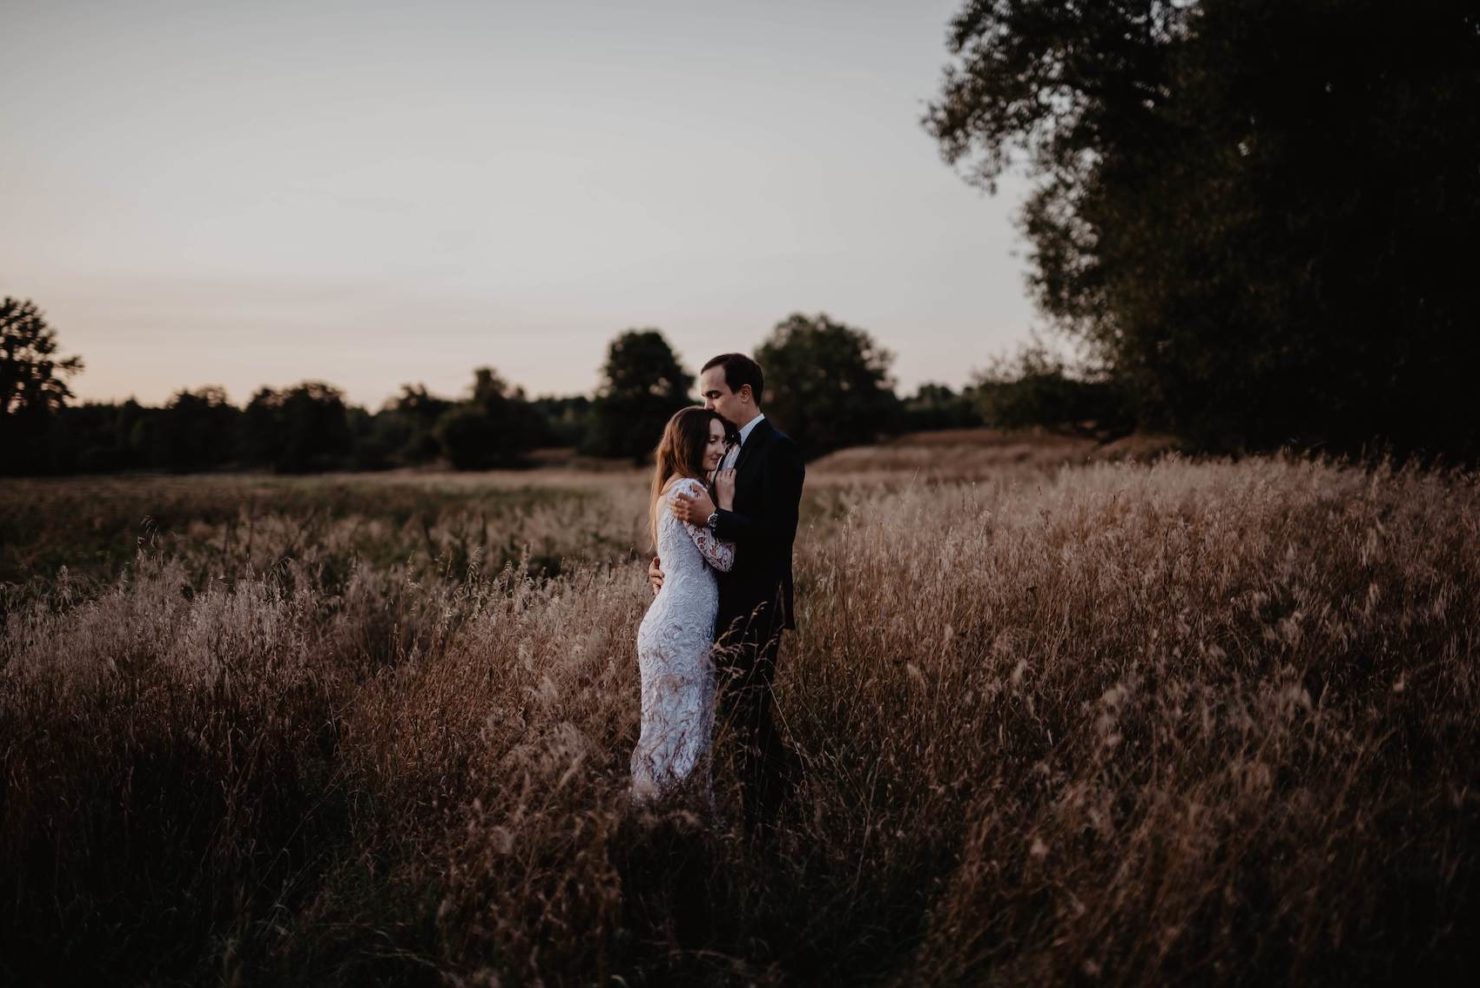 Example of a couples wedding photo in corn field